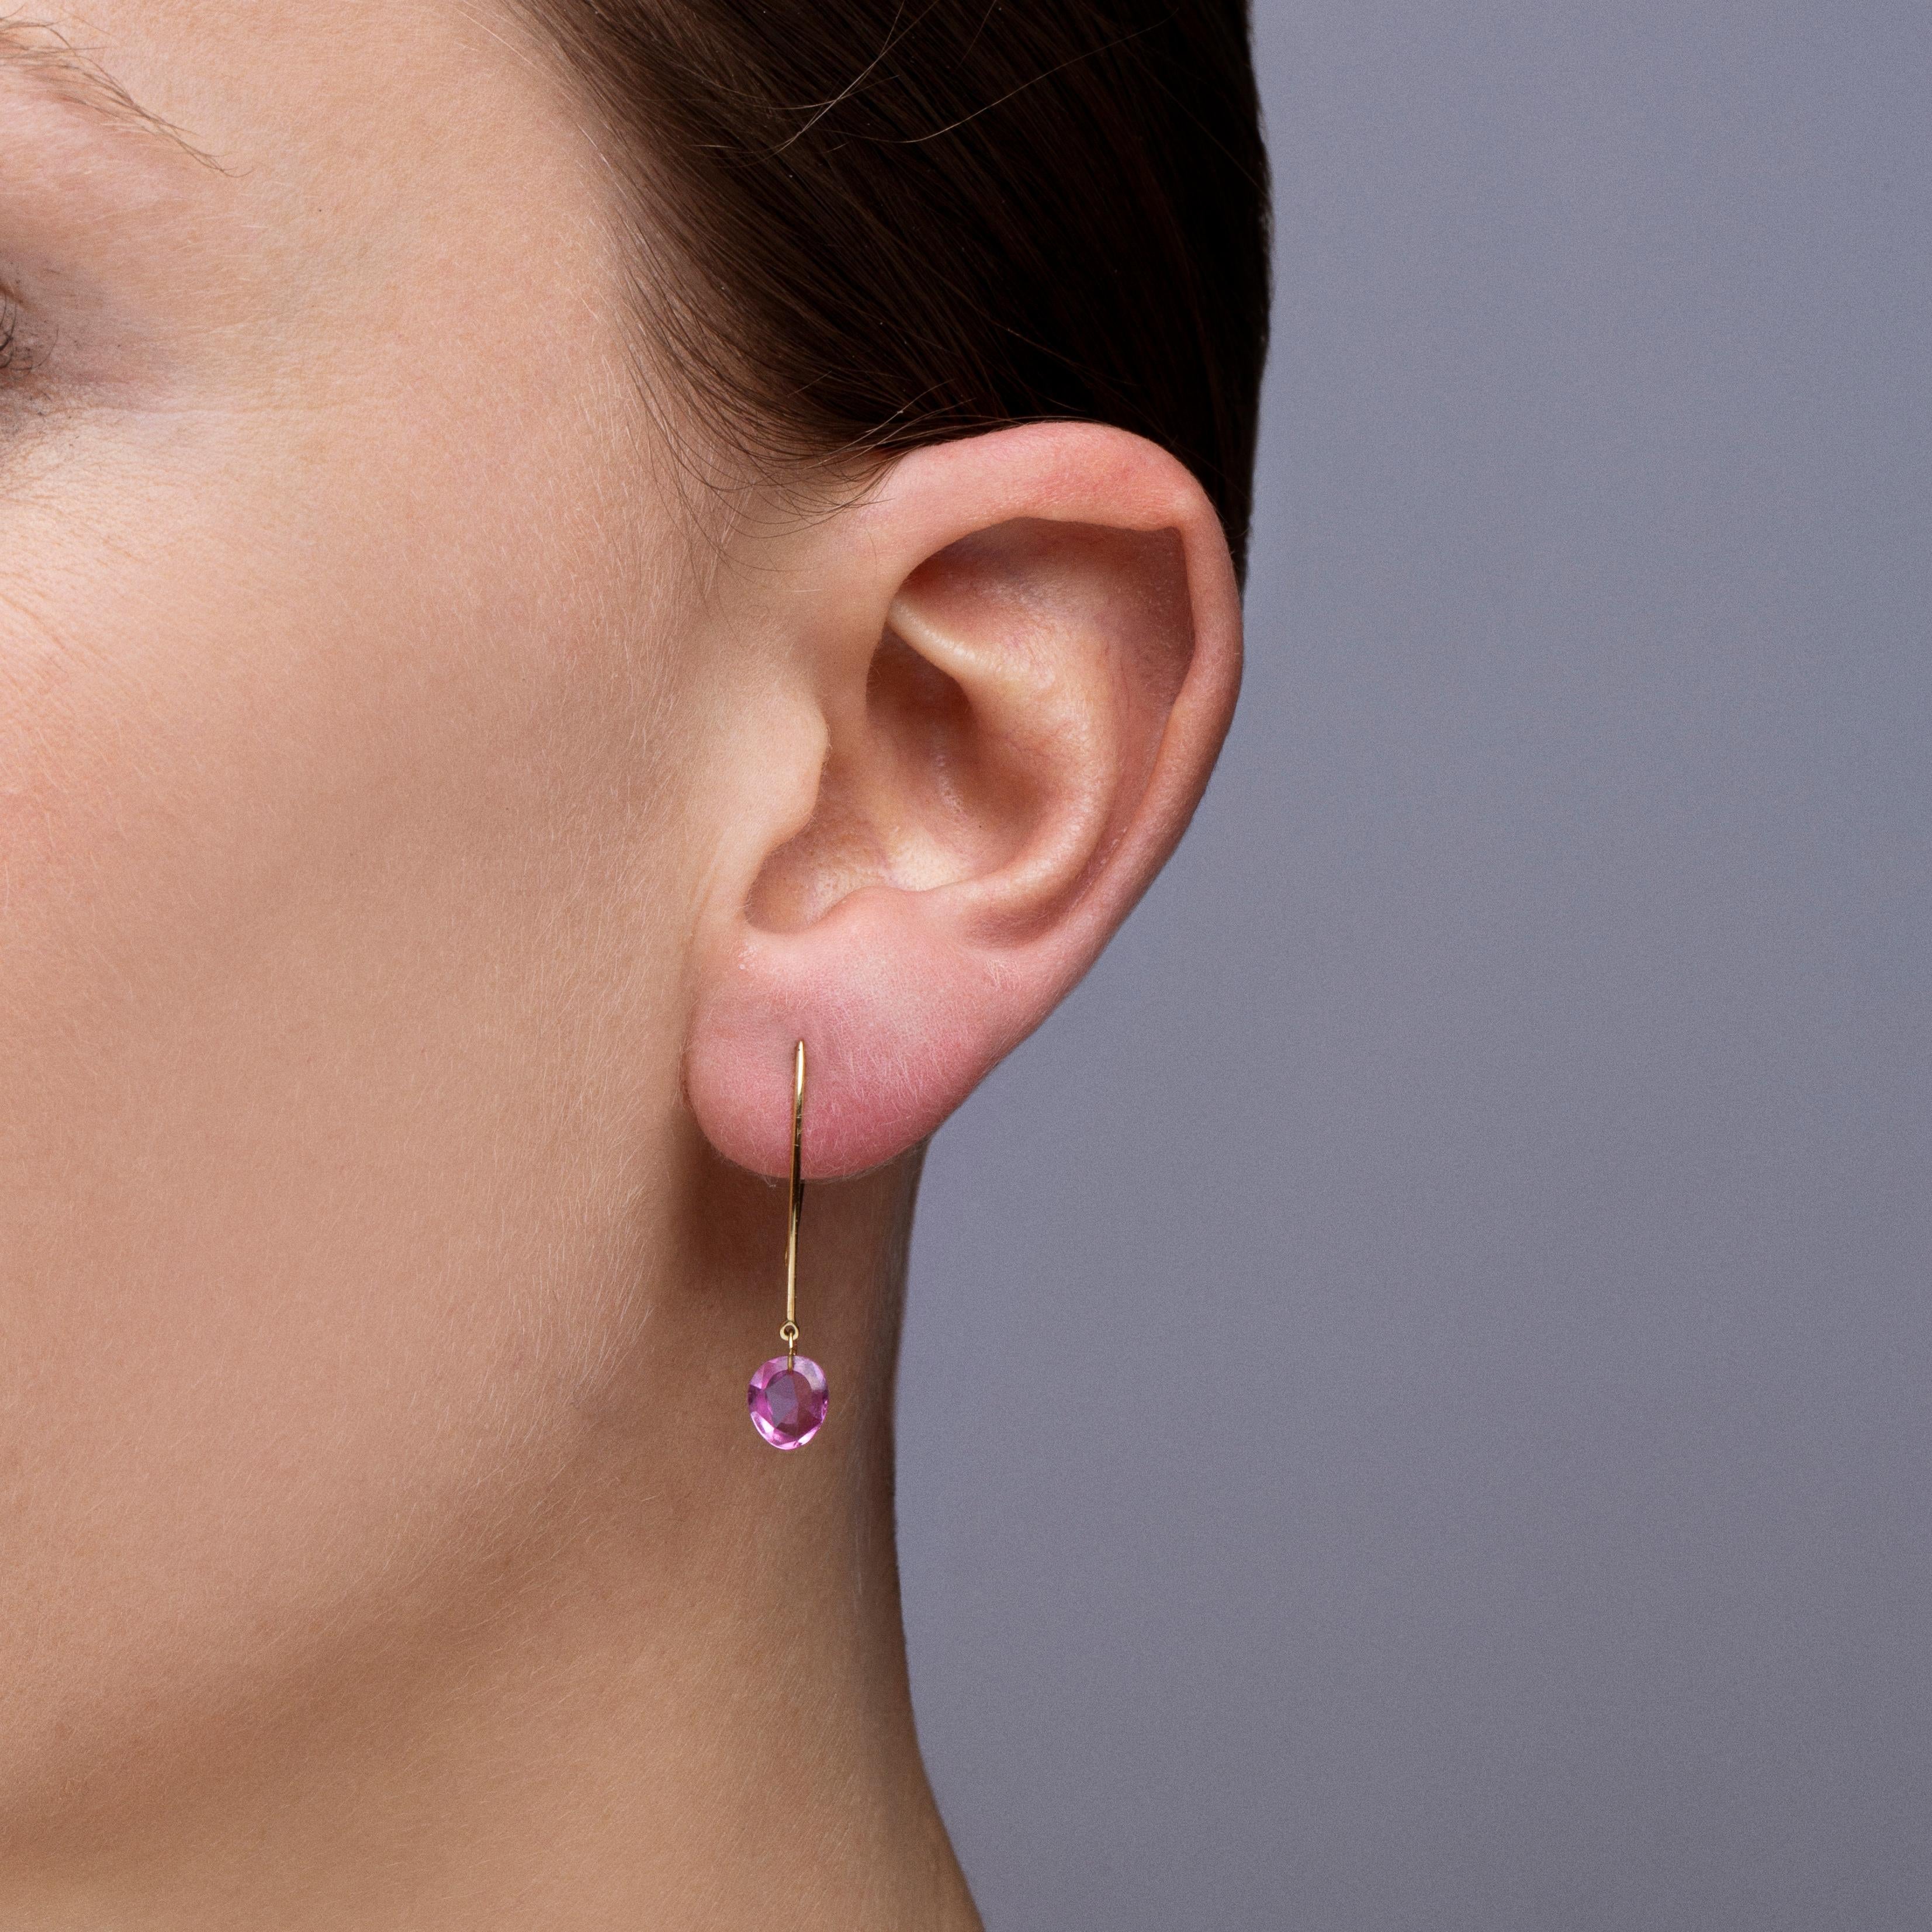 Alex Jona design collection, hand crafted in Italy, 18 karat yellow gold Earrings suspending two flat cut pink sapphires weighing 1.85 carats in total.
Dimension: L x  1 cm / L x  0.39 in.

Alex Jona jewels stand out, not only for their special